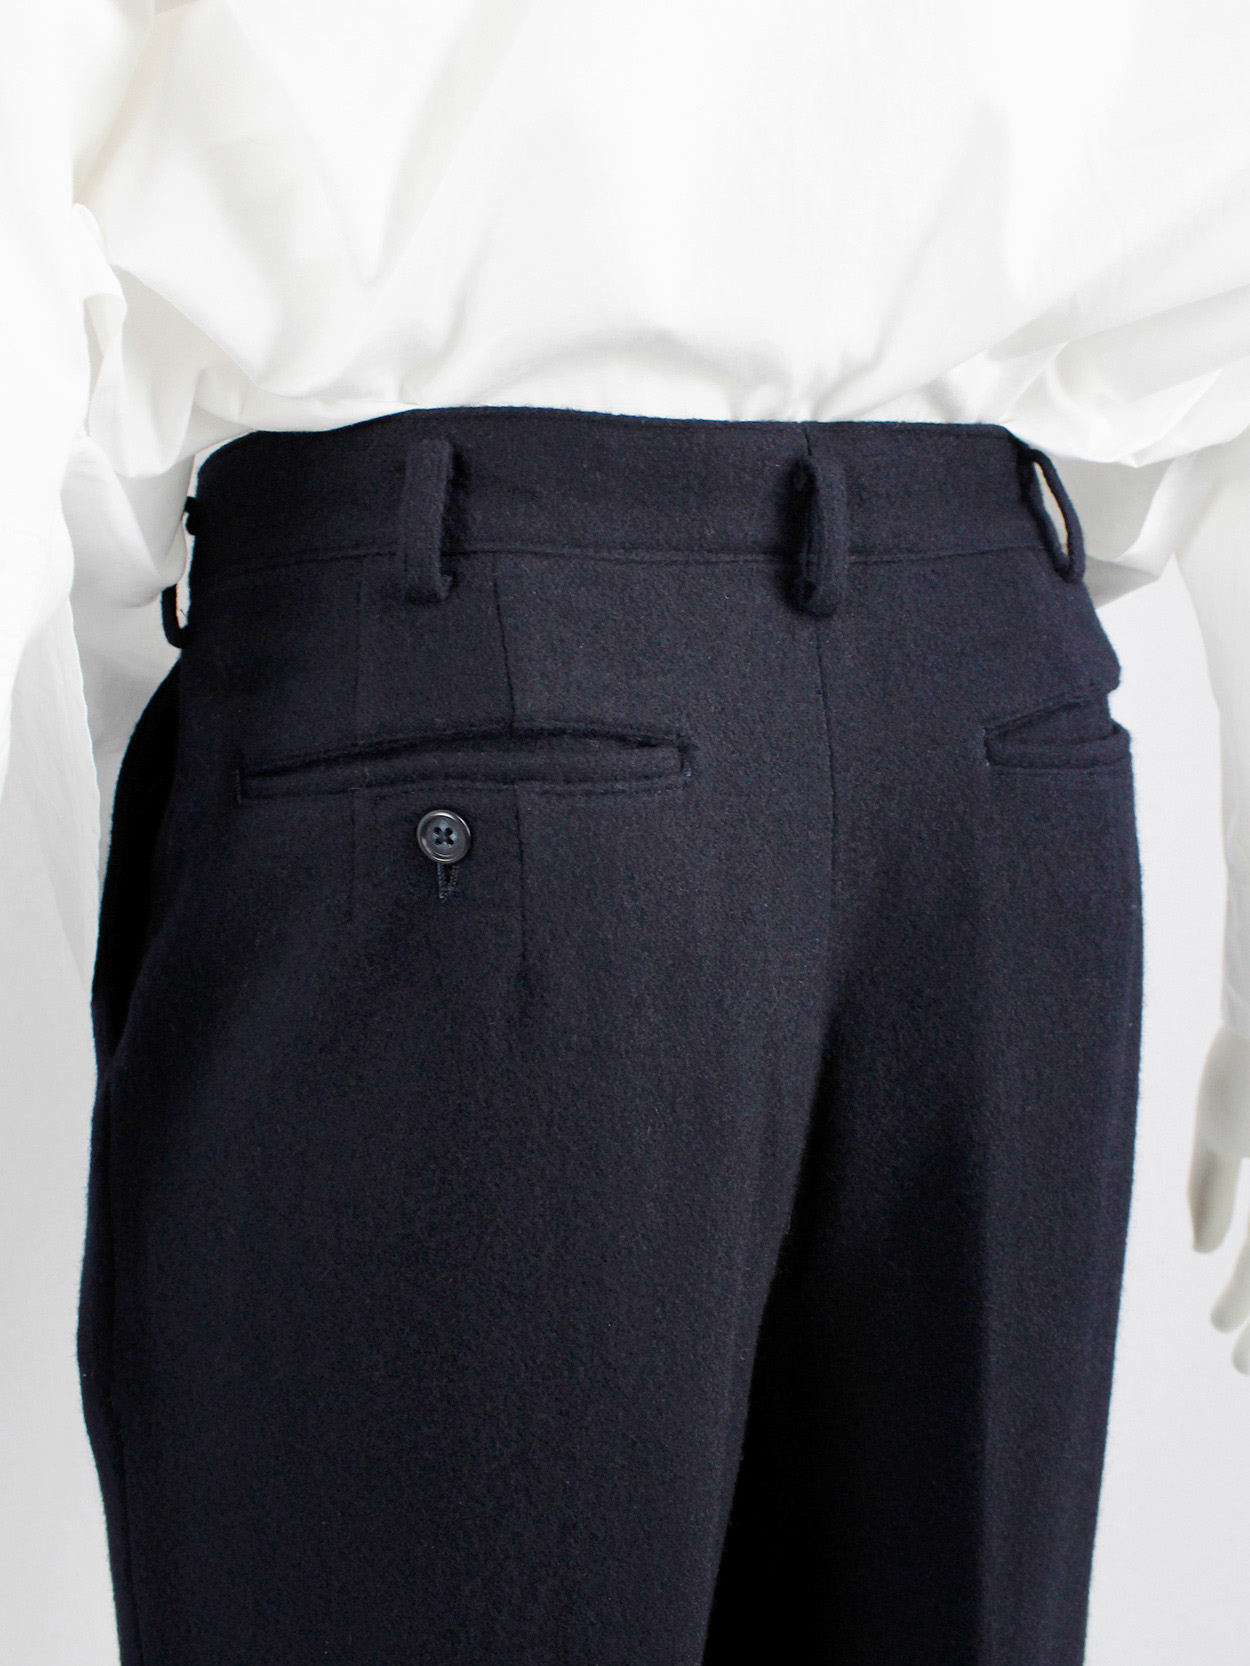 Ys for men dark blue straight trousers with pleated waist 1980s 80s (3)